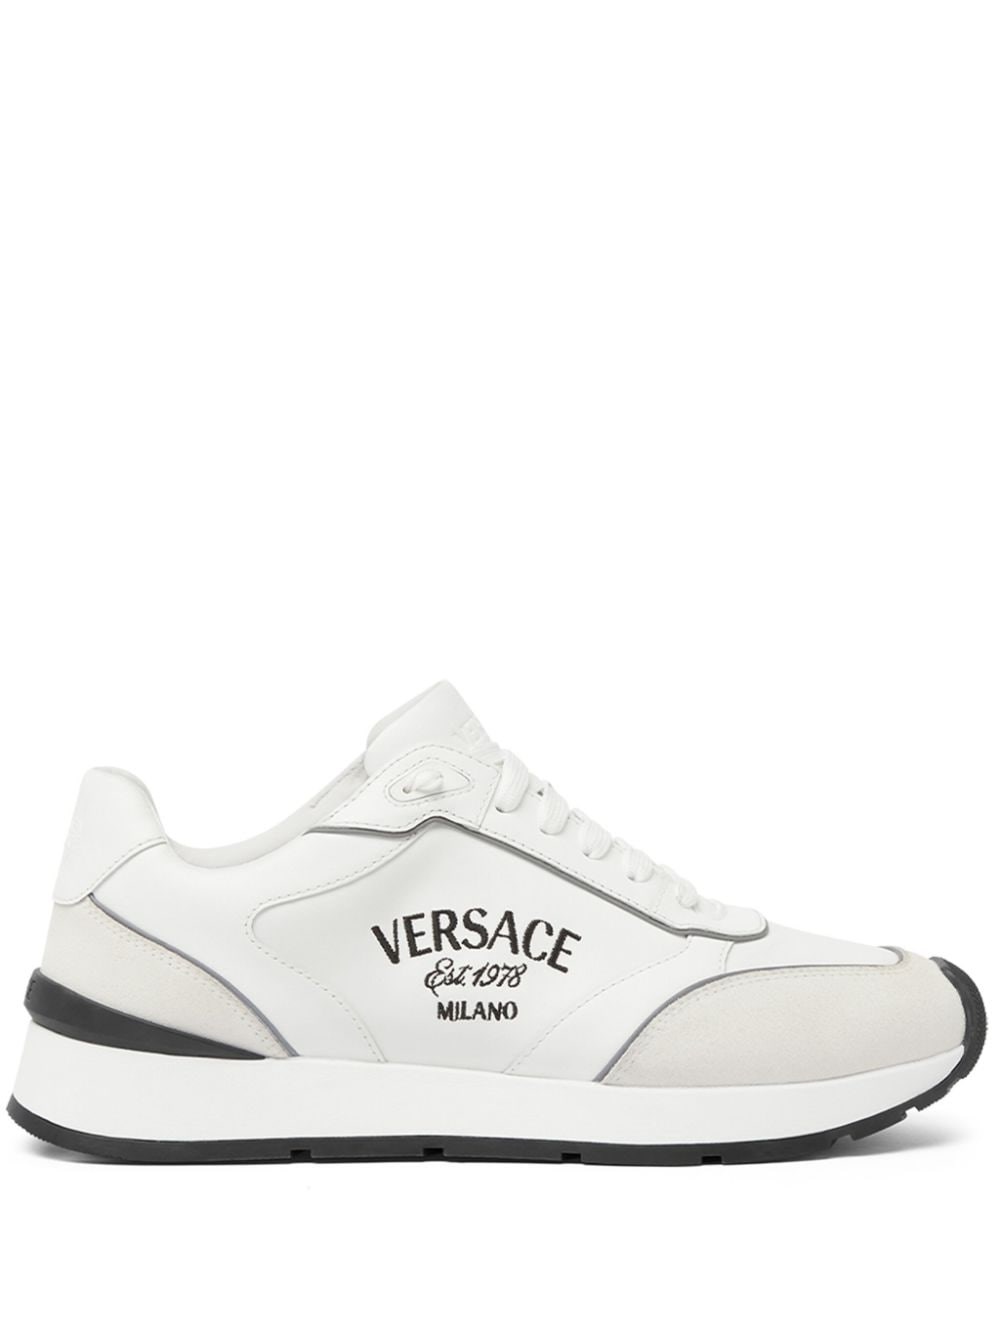 Shop Versace 'milano' Sneakers In White